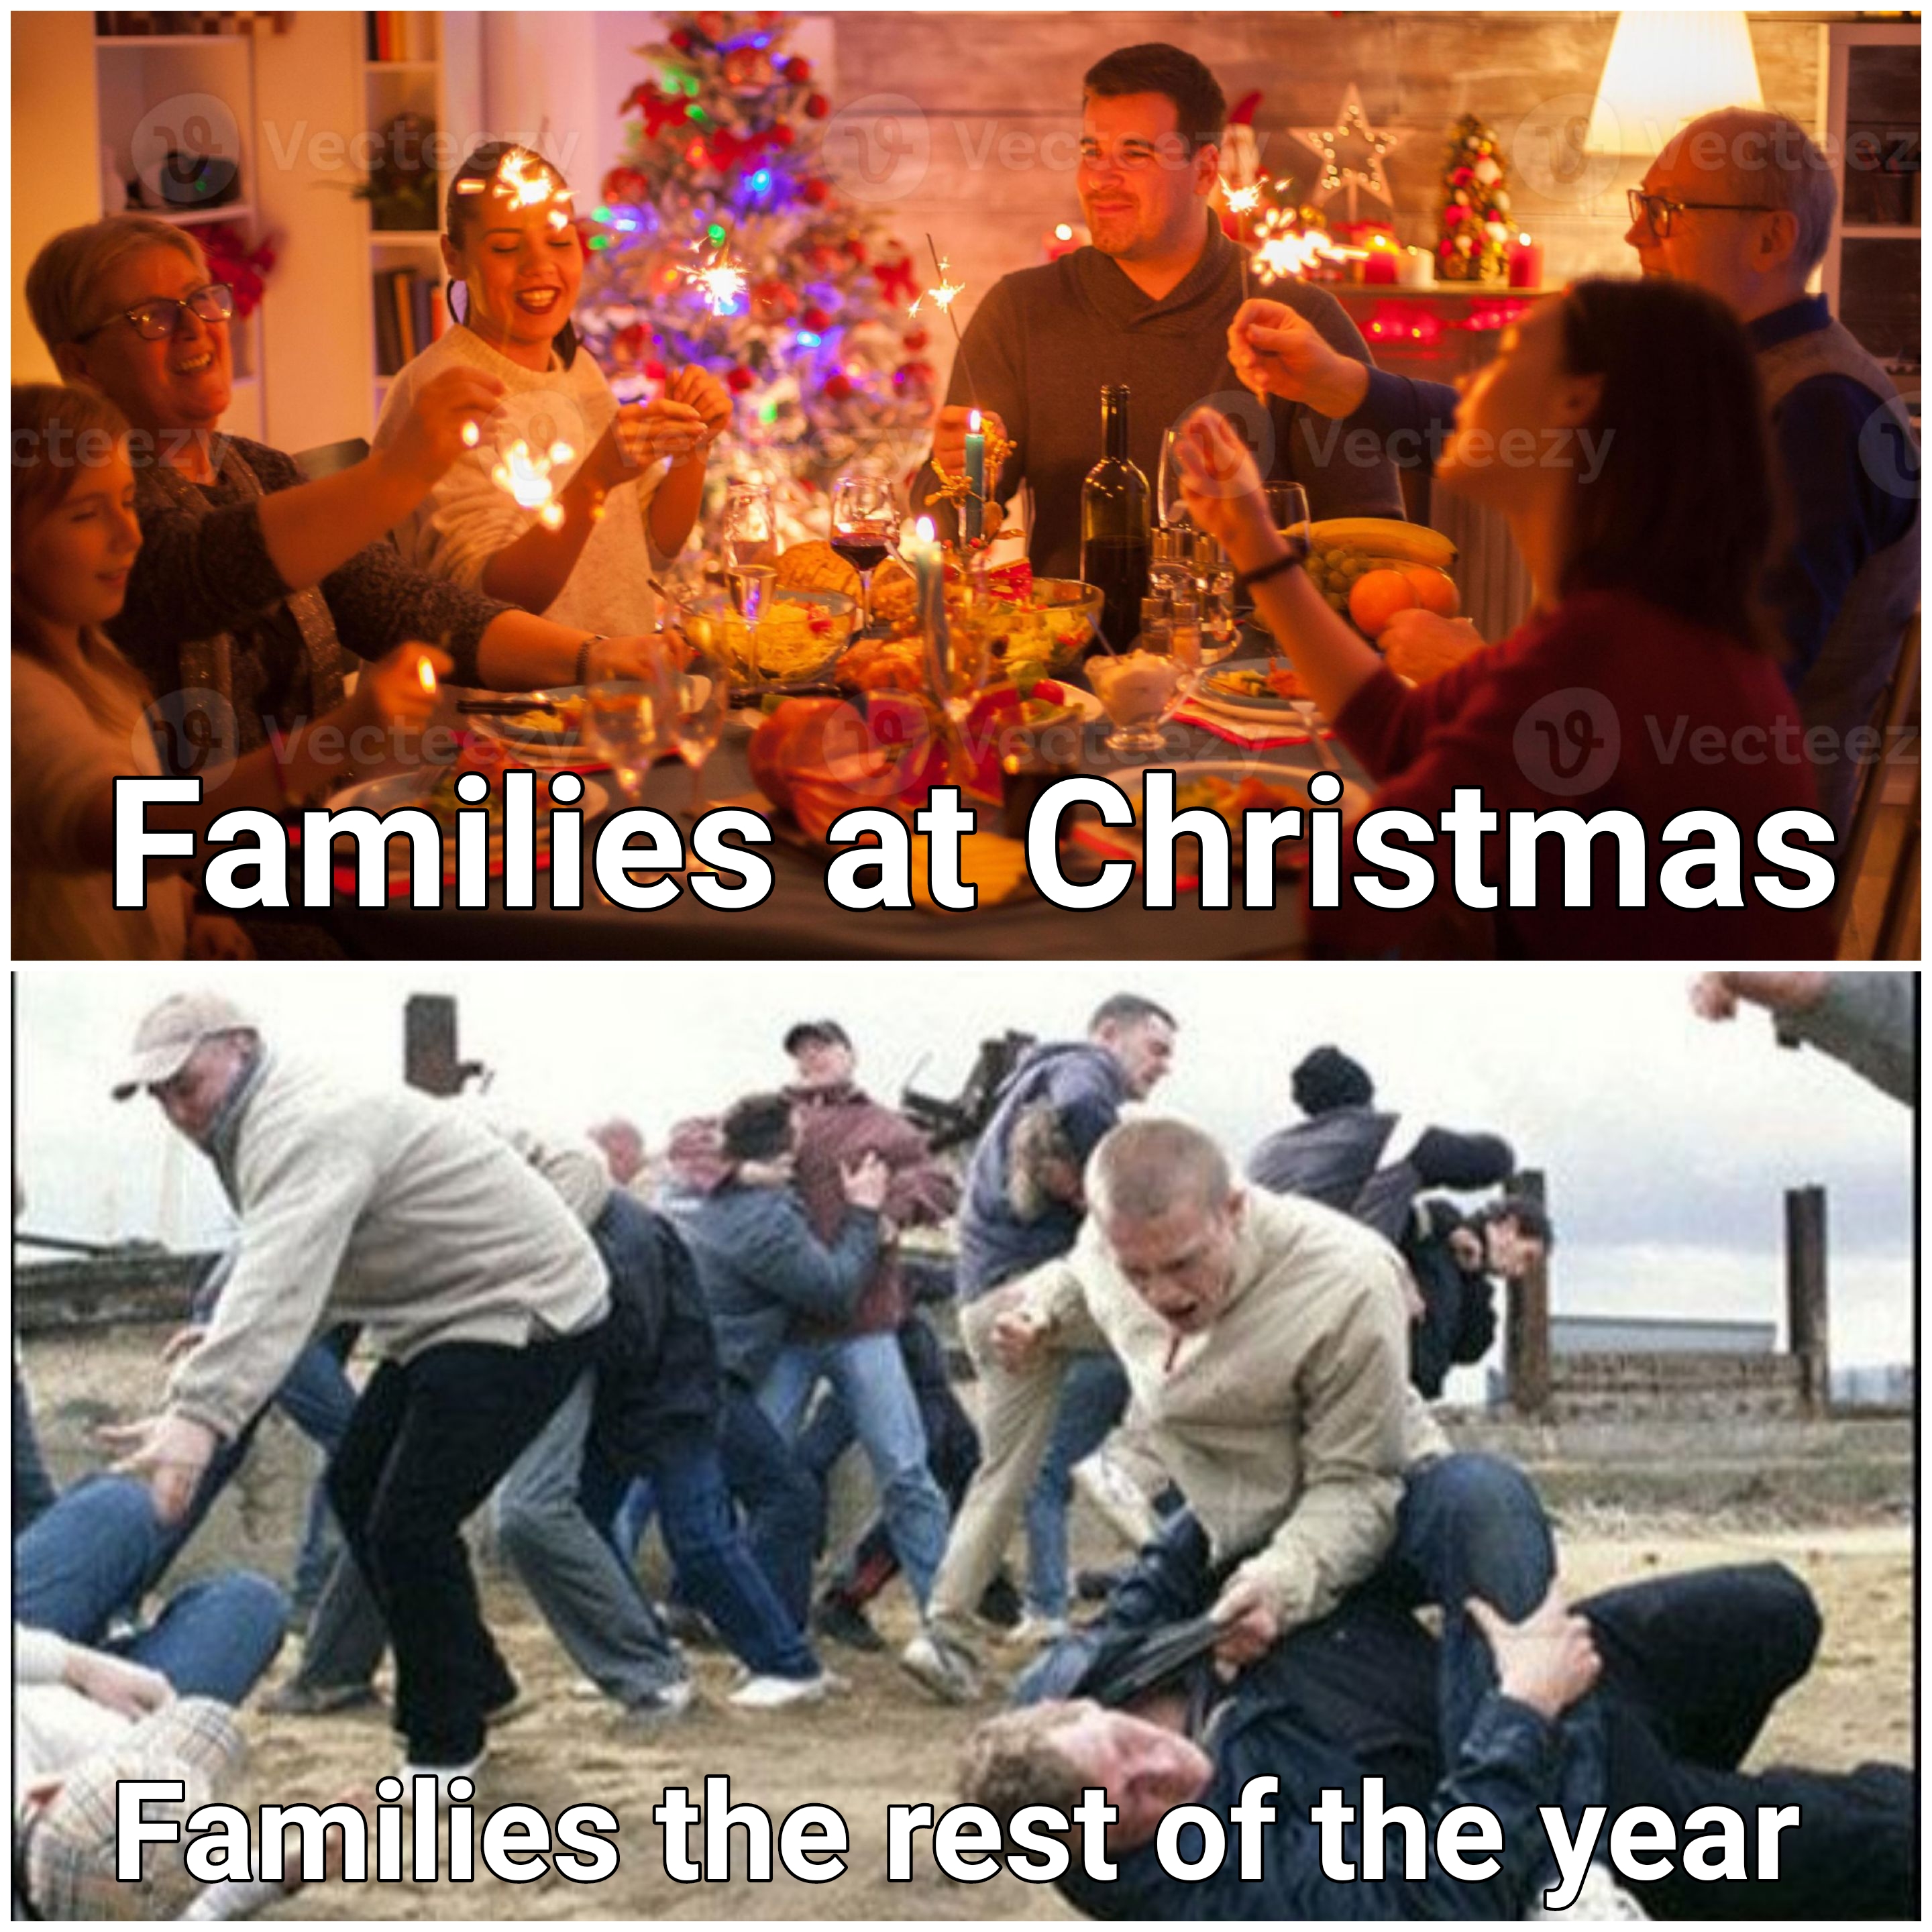 funny and dank memes - event - steez Veett Vecreezy vect 19 Vectees Families at Christmas Families the rest of the year